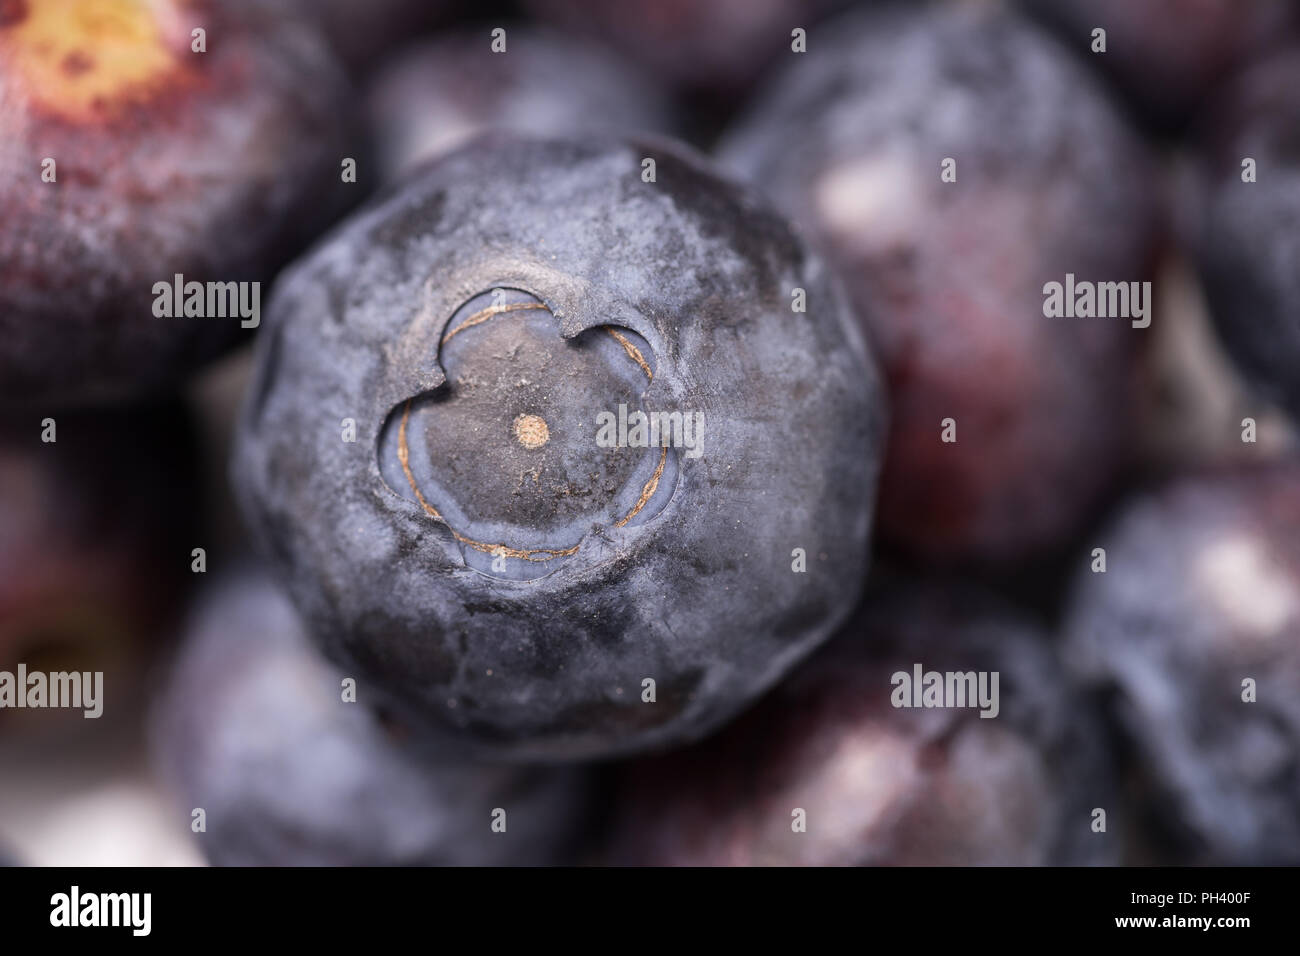 Delicious organic ripe blueberry, close up and background Stock Photo